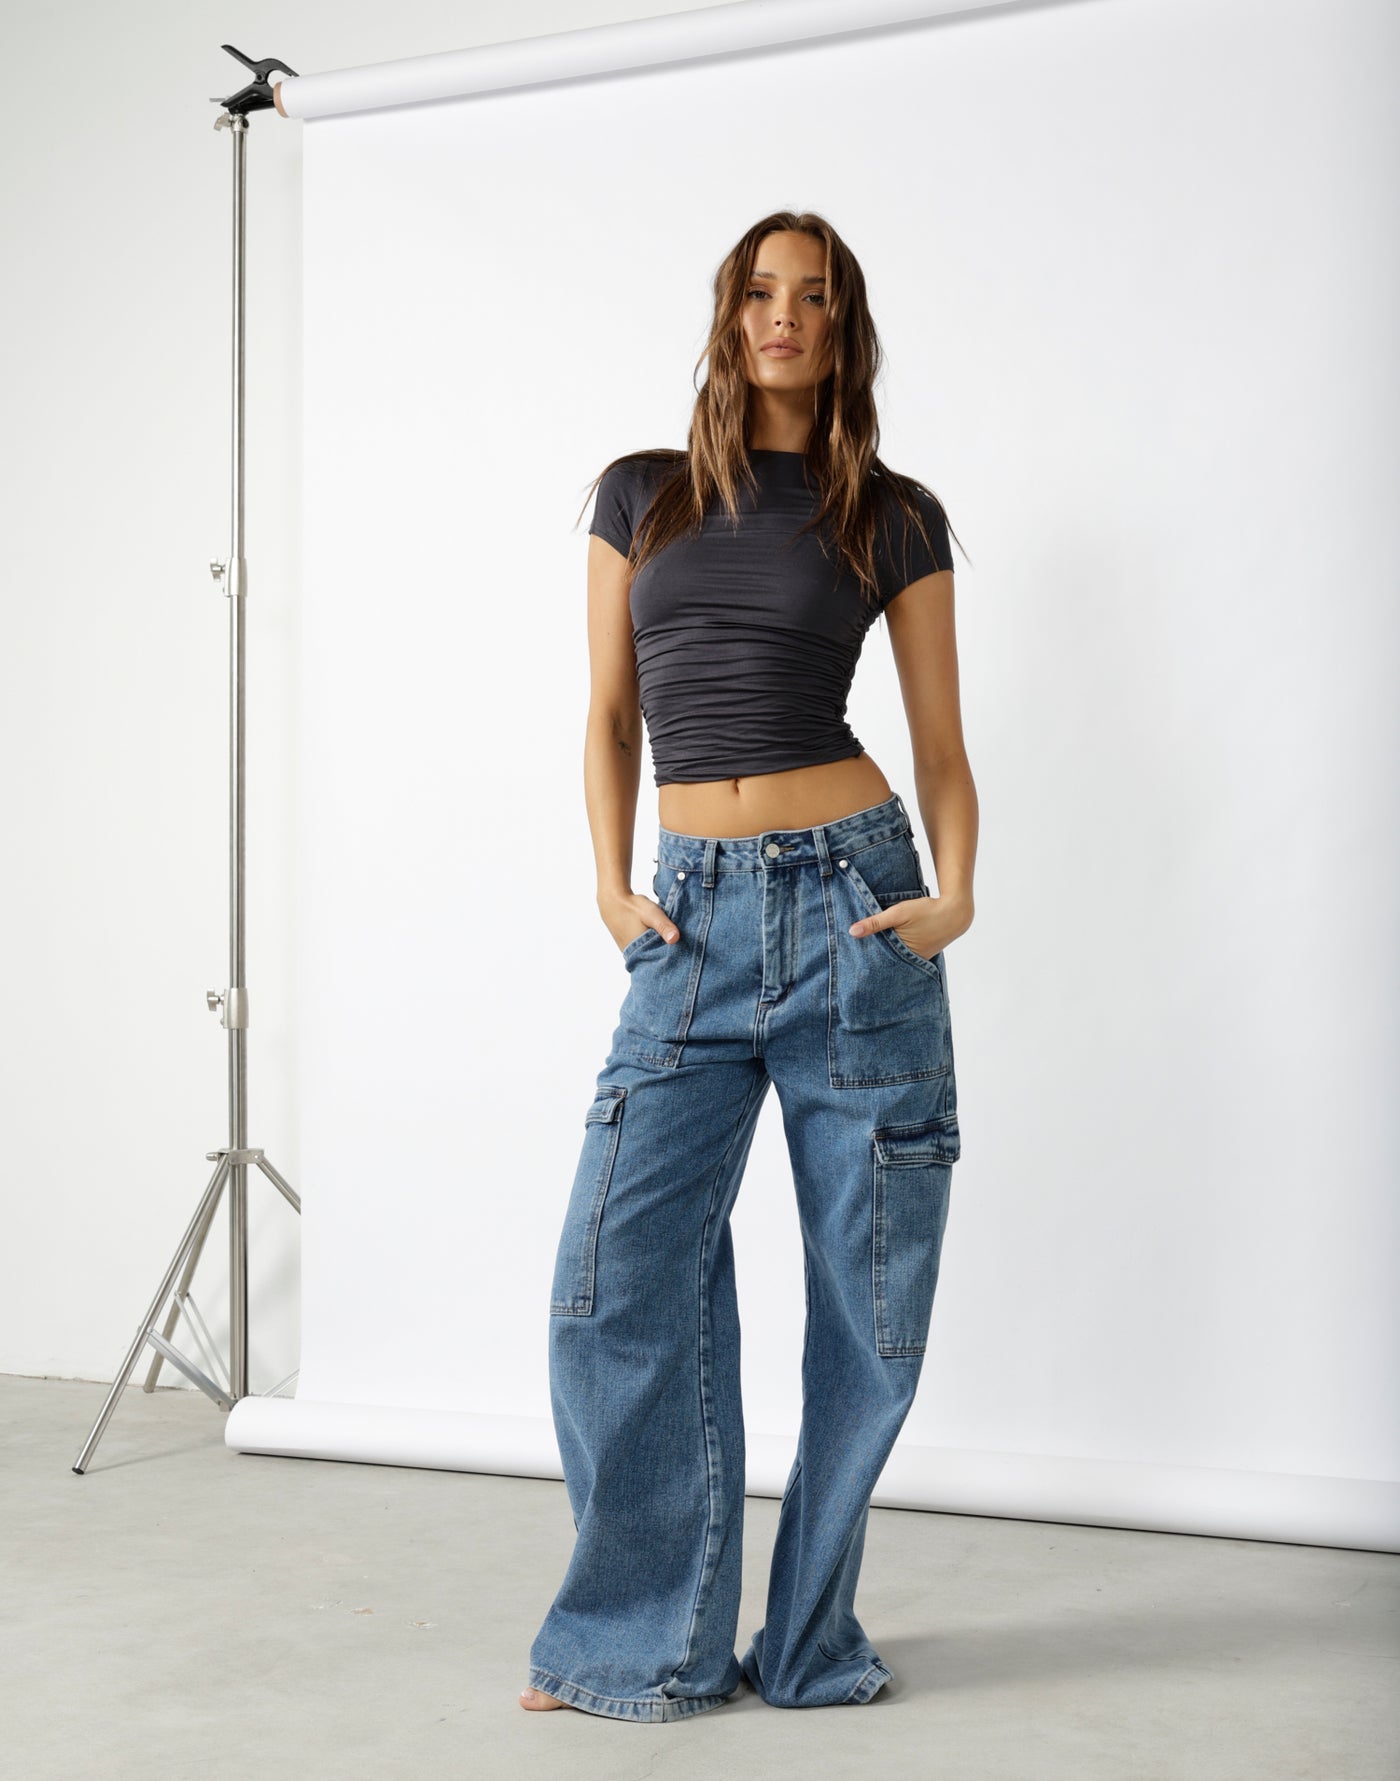 Adrian Cargo Jeans (Mid Wash) - Mid Wash Blue Cargo Jeans - Women's Pants - Charcoal Clothing